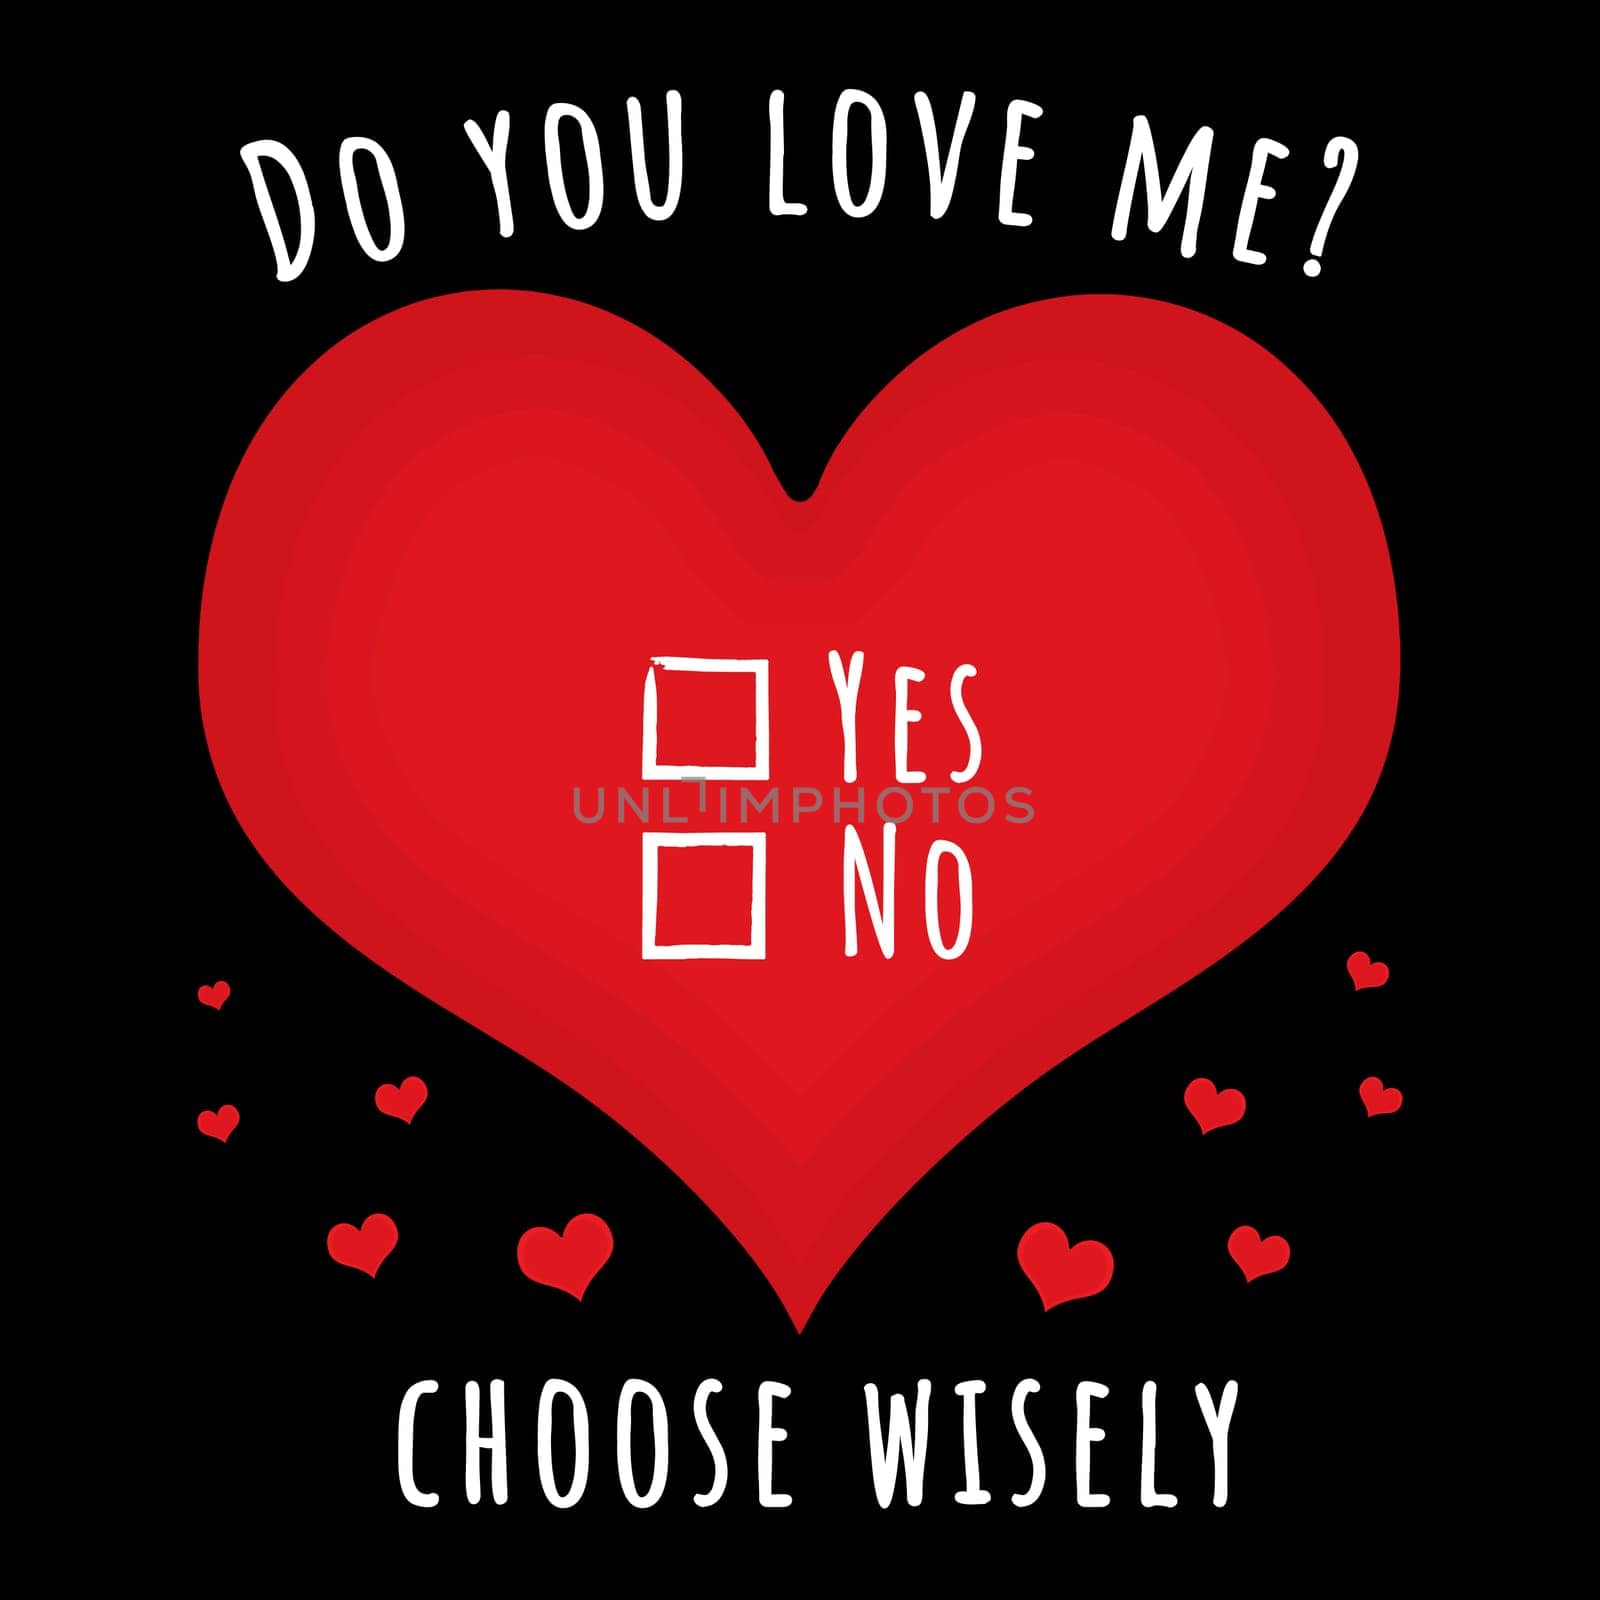 Do you love me - choose wisely by Bigalbaloo